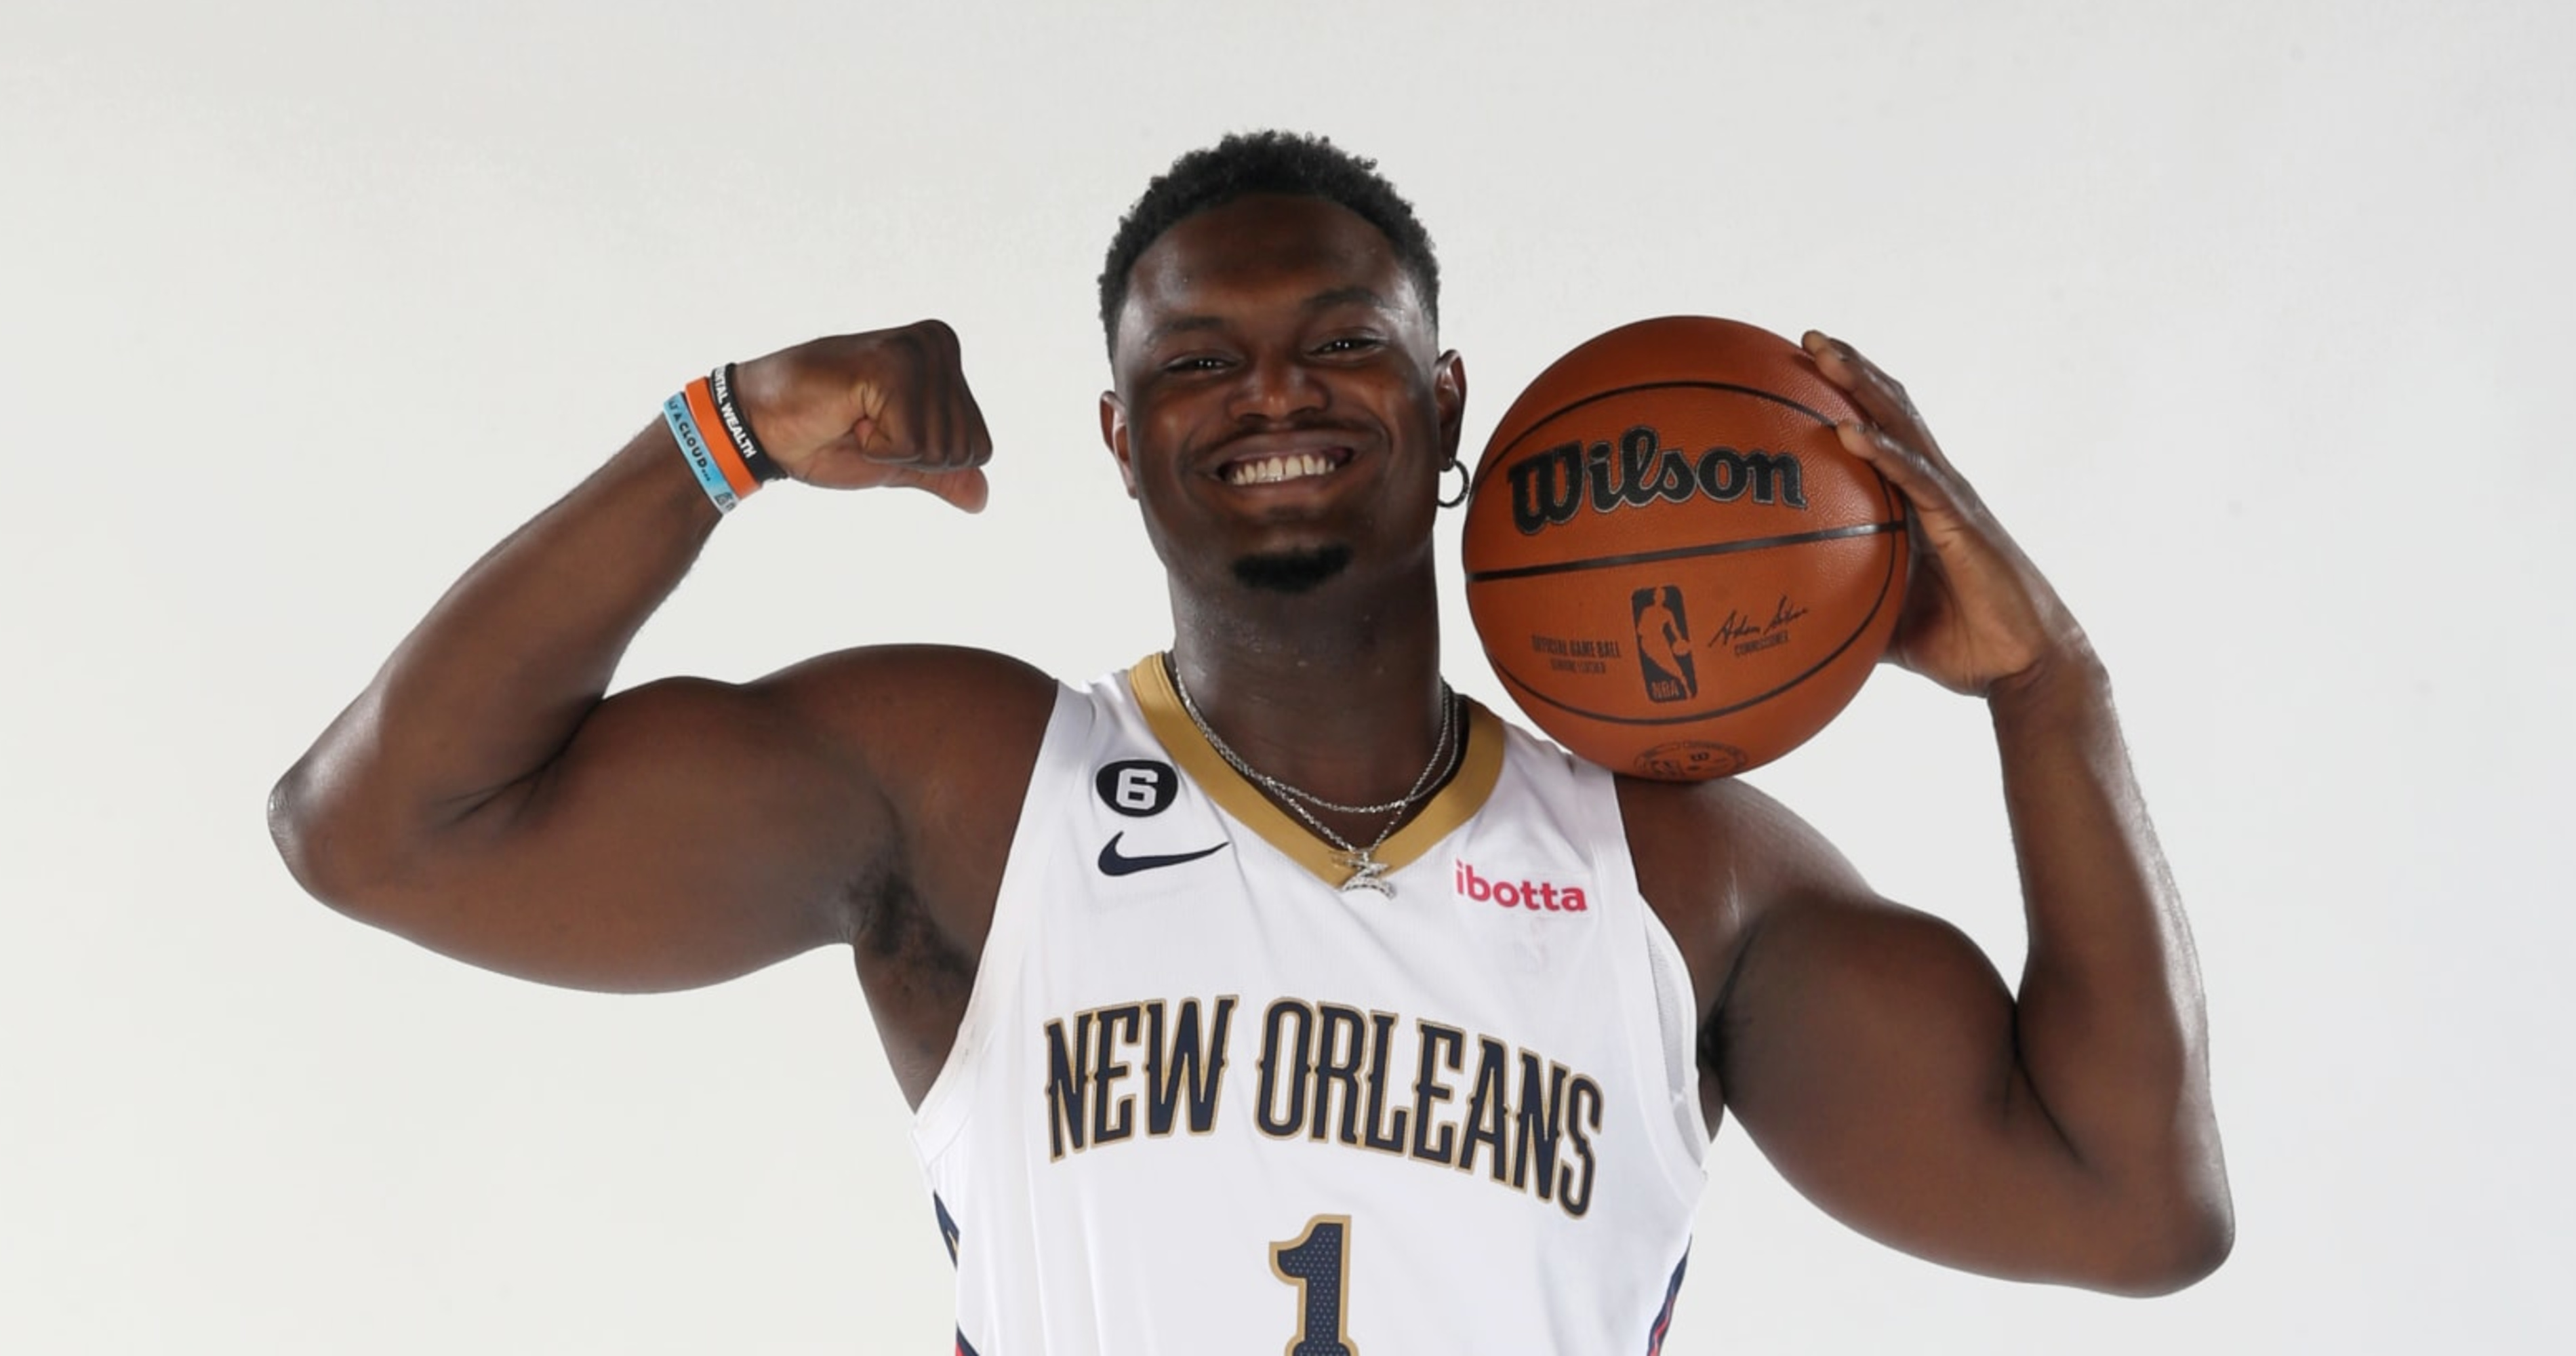 NBA news 2022: Zion Williamson is in terrifying shape, New Orleans Pelicans